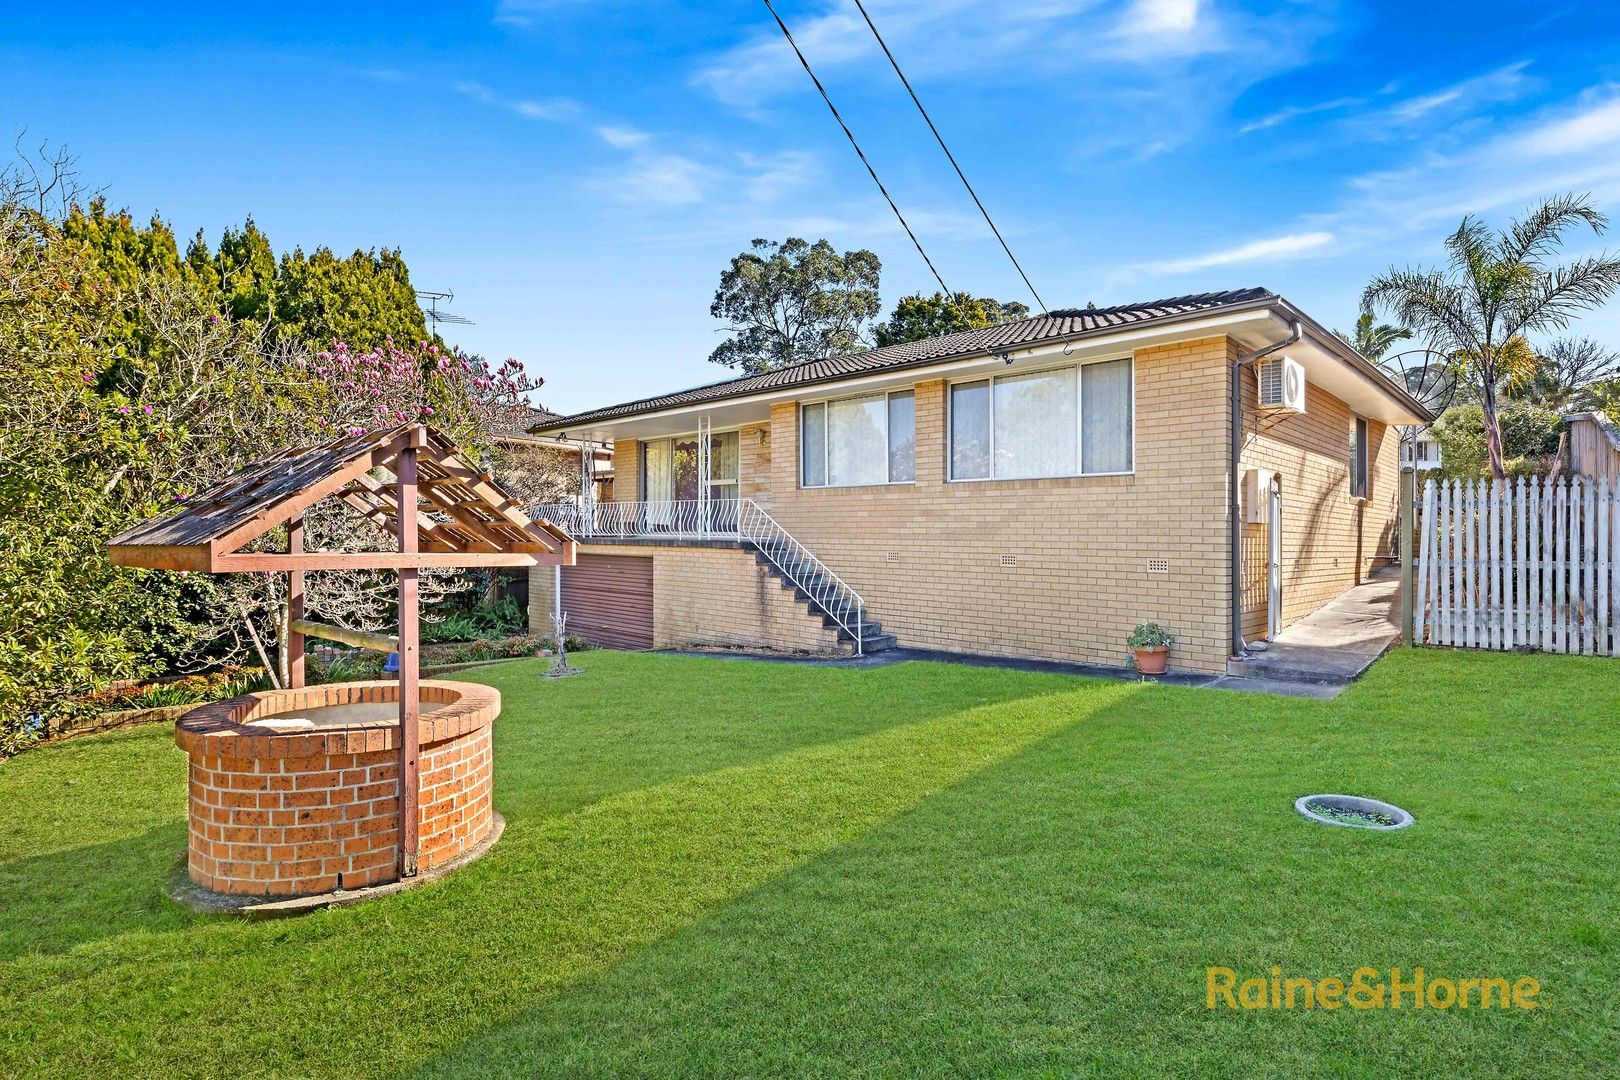 3 bedrooms House in 17 Yalding Ave CARLINGFORD NSW, 2118